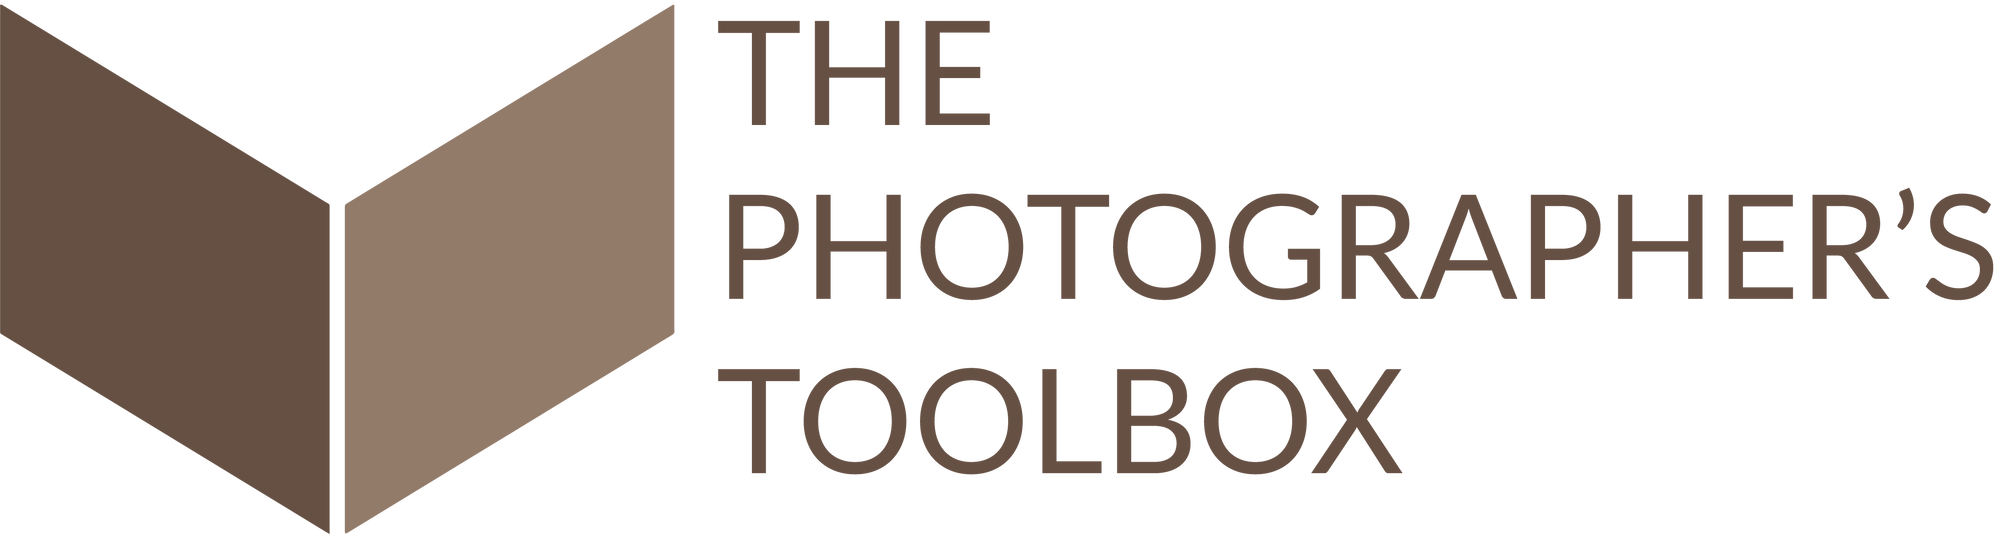 The Photographer's Toolbox